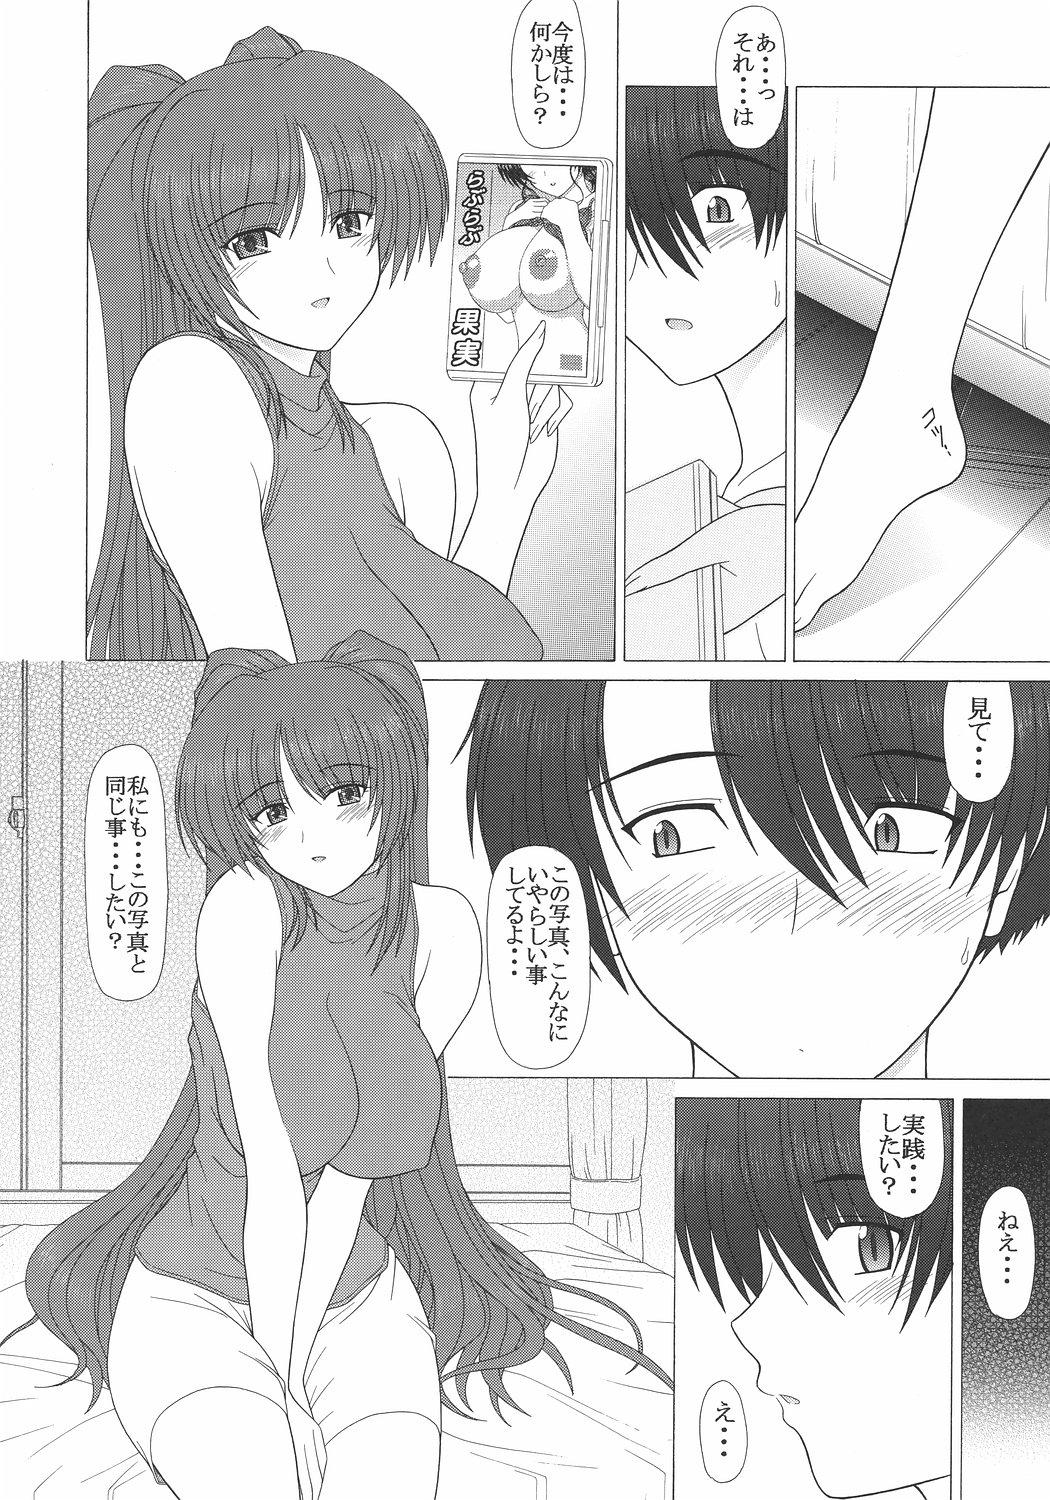 Freckles PURE NEXT GENERATION Vol. 7 Tama-nee to Love Love - Toheart2 Blond - Page 9